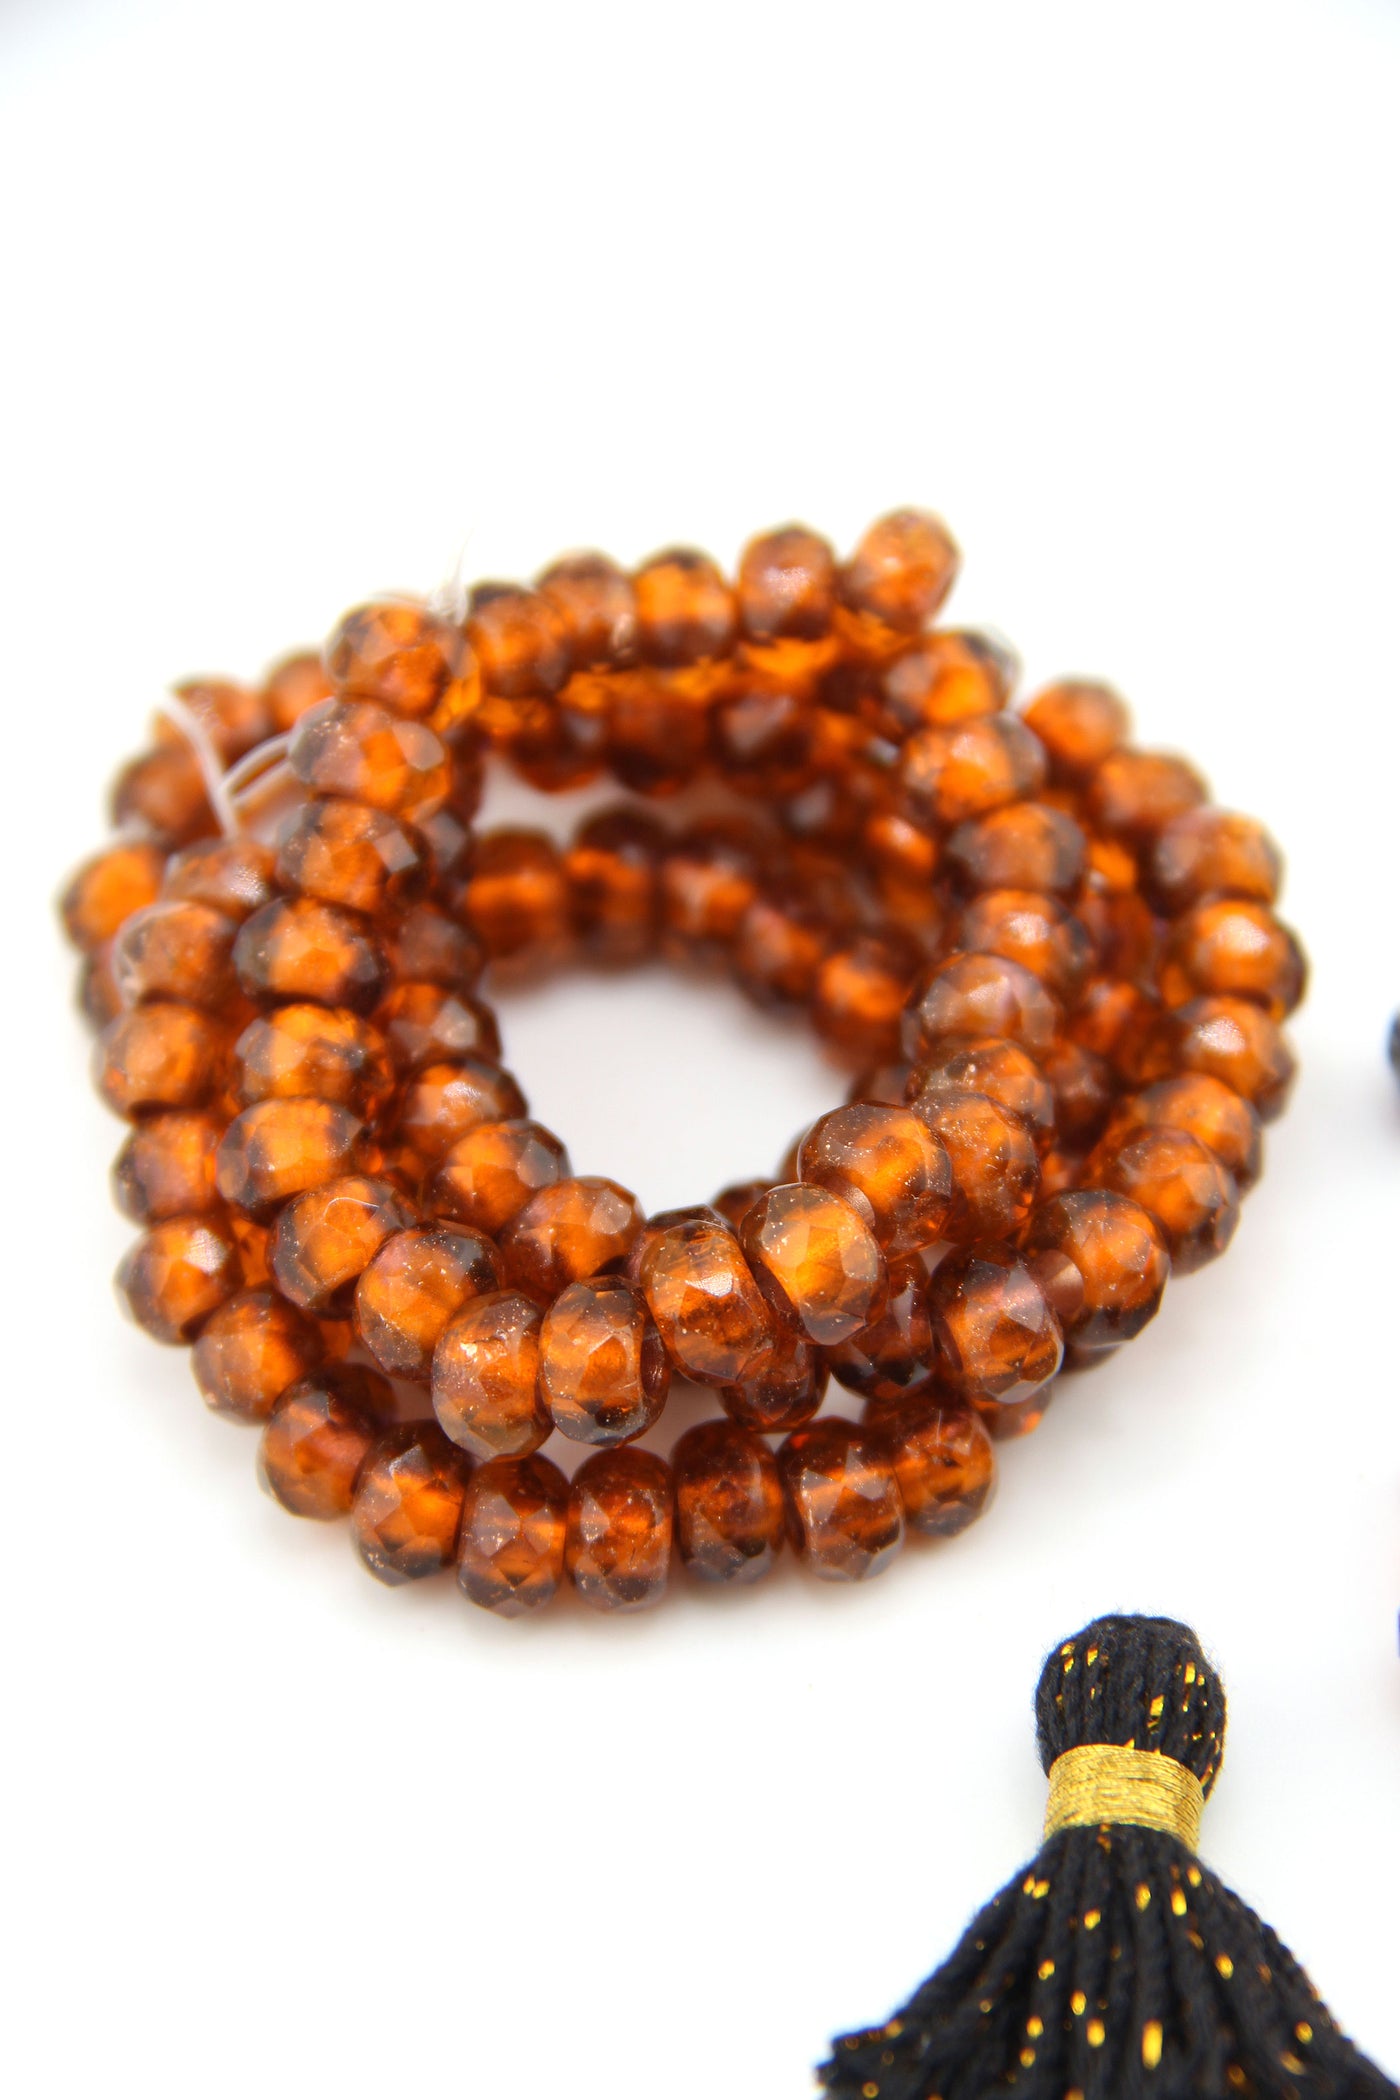 Orange Czech Glass with Copper Lining, 9x6mm, 25 Large Hole Beads